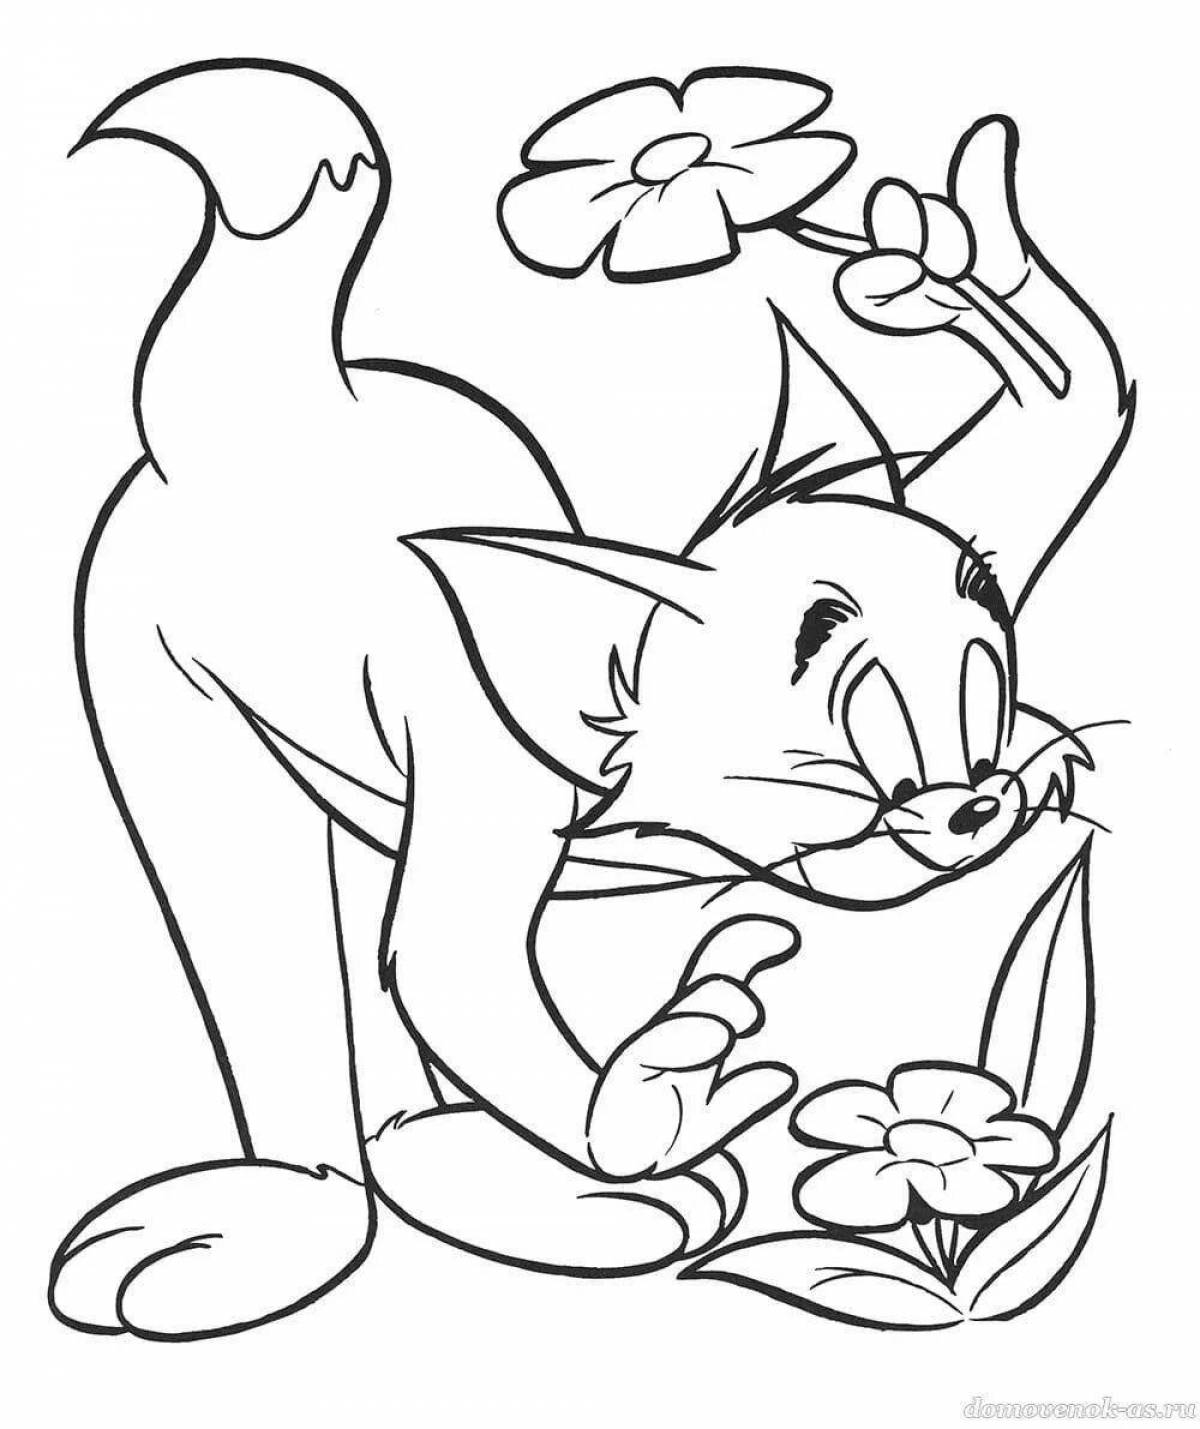 Attractive coloring book in pdf format